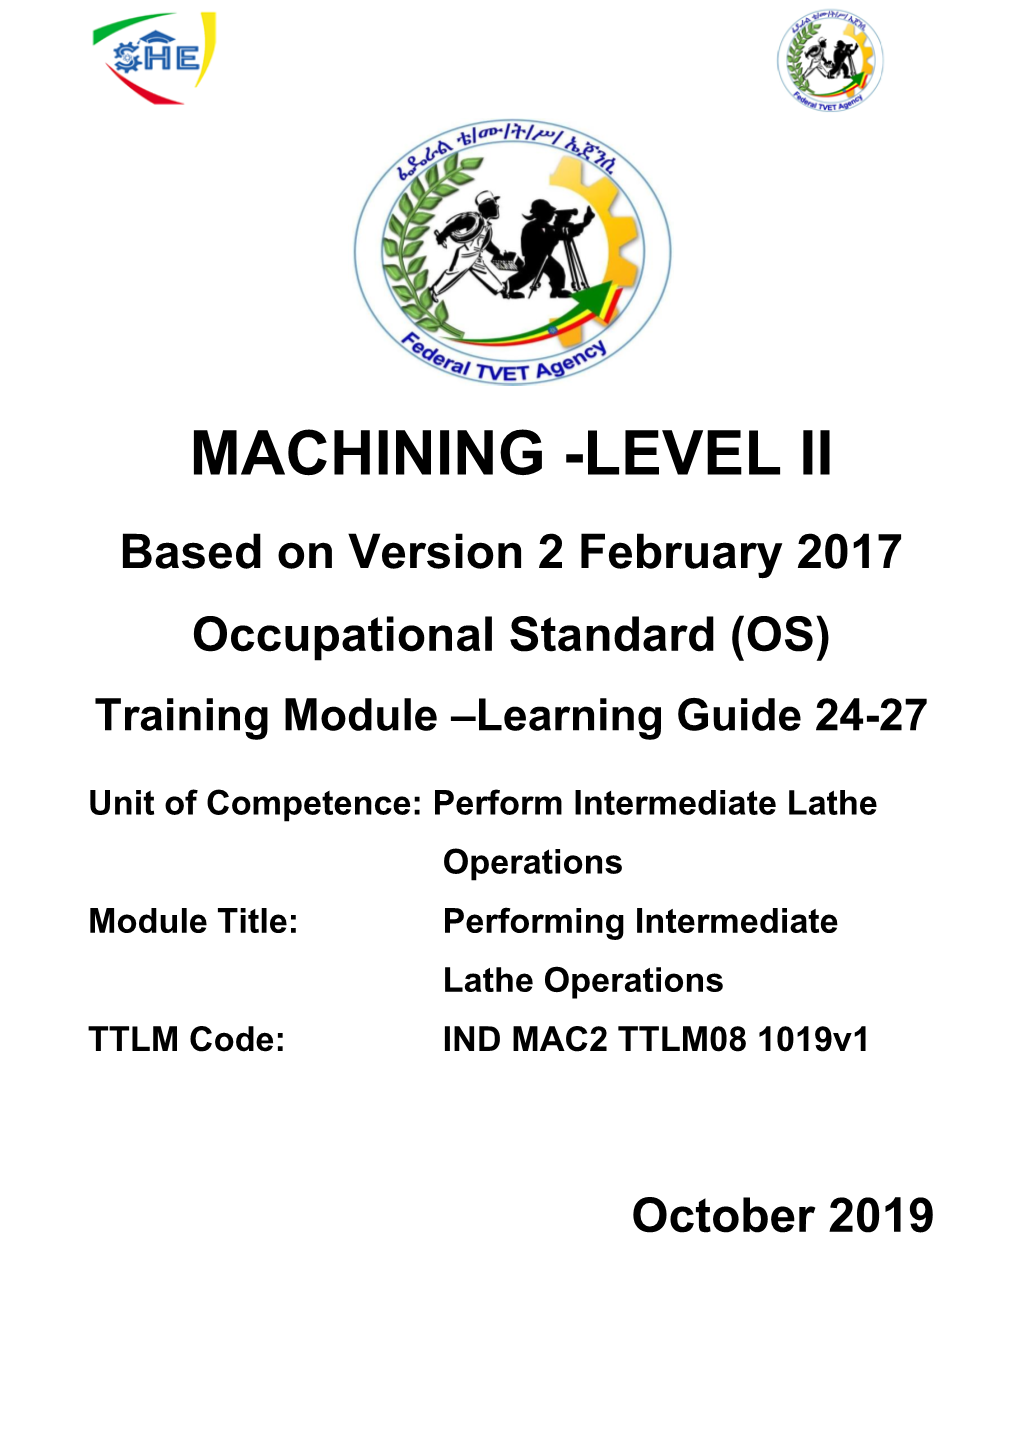 MACHINING -LEVEL II Based on Version 2 February 2017 Occupational Standard (OS) Training Module –Learning Guide 24-27